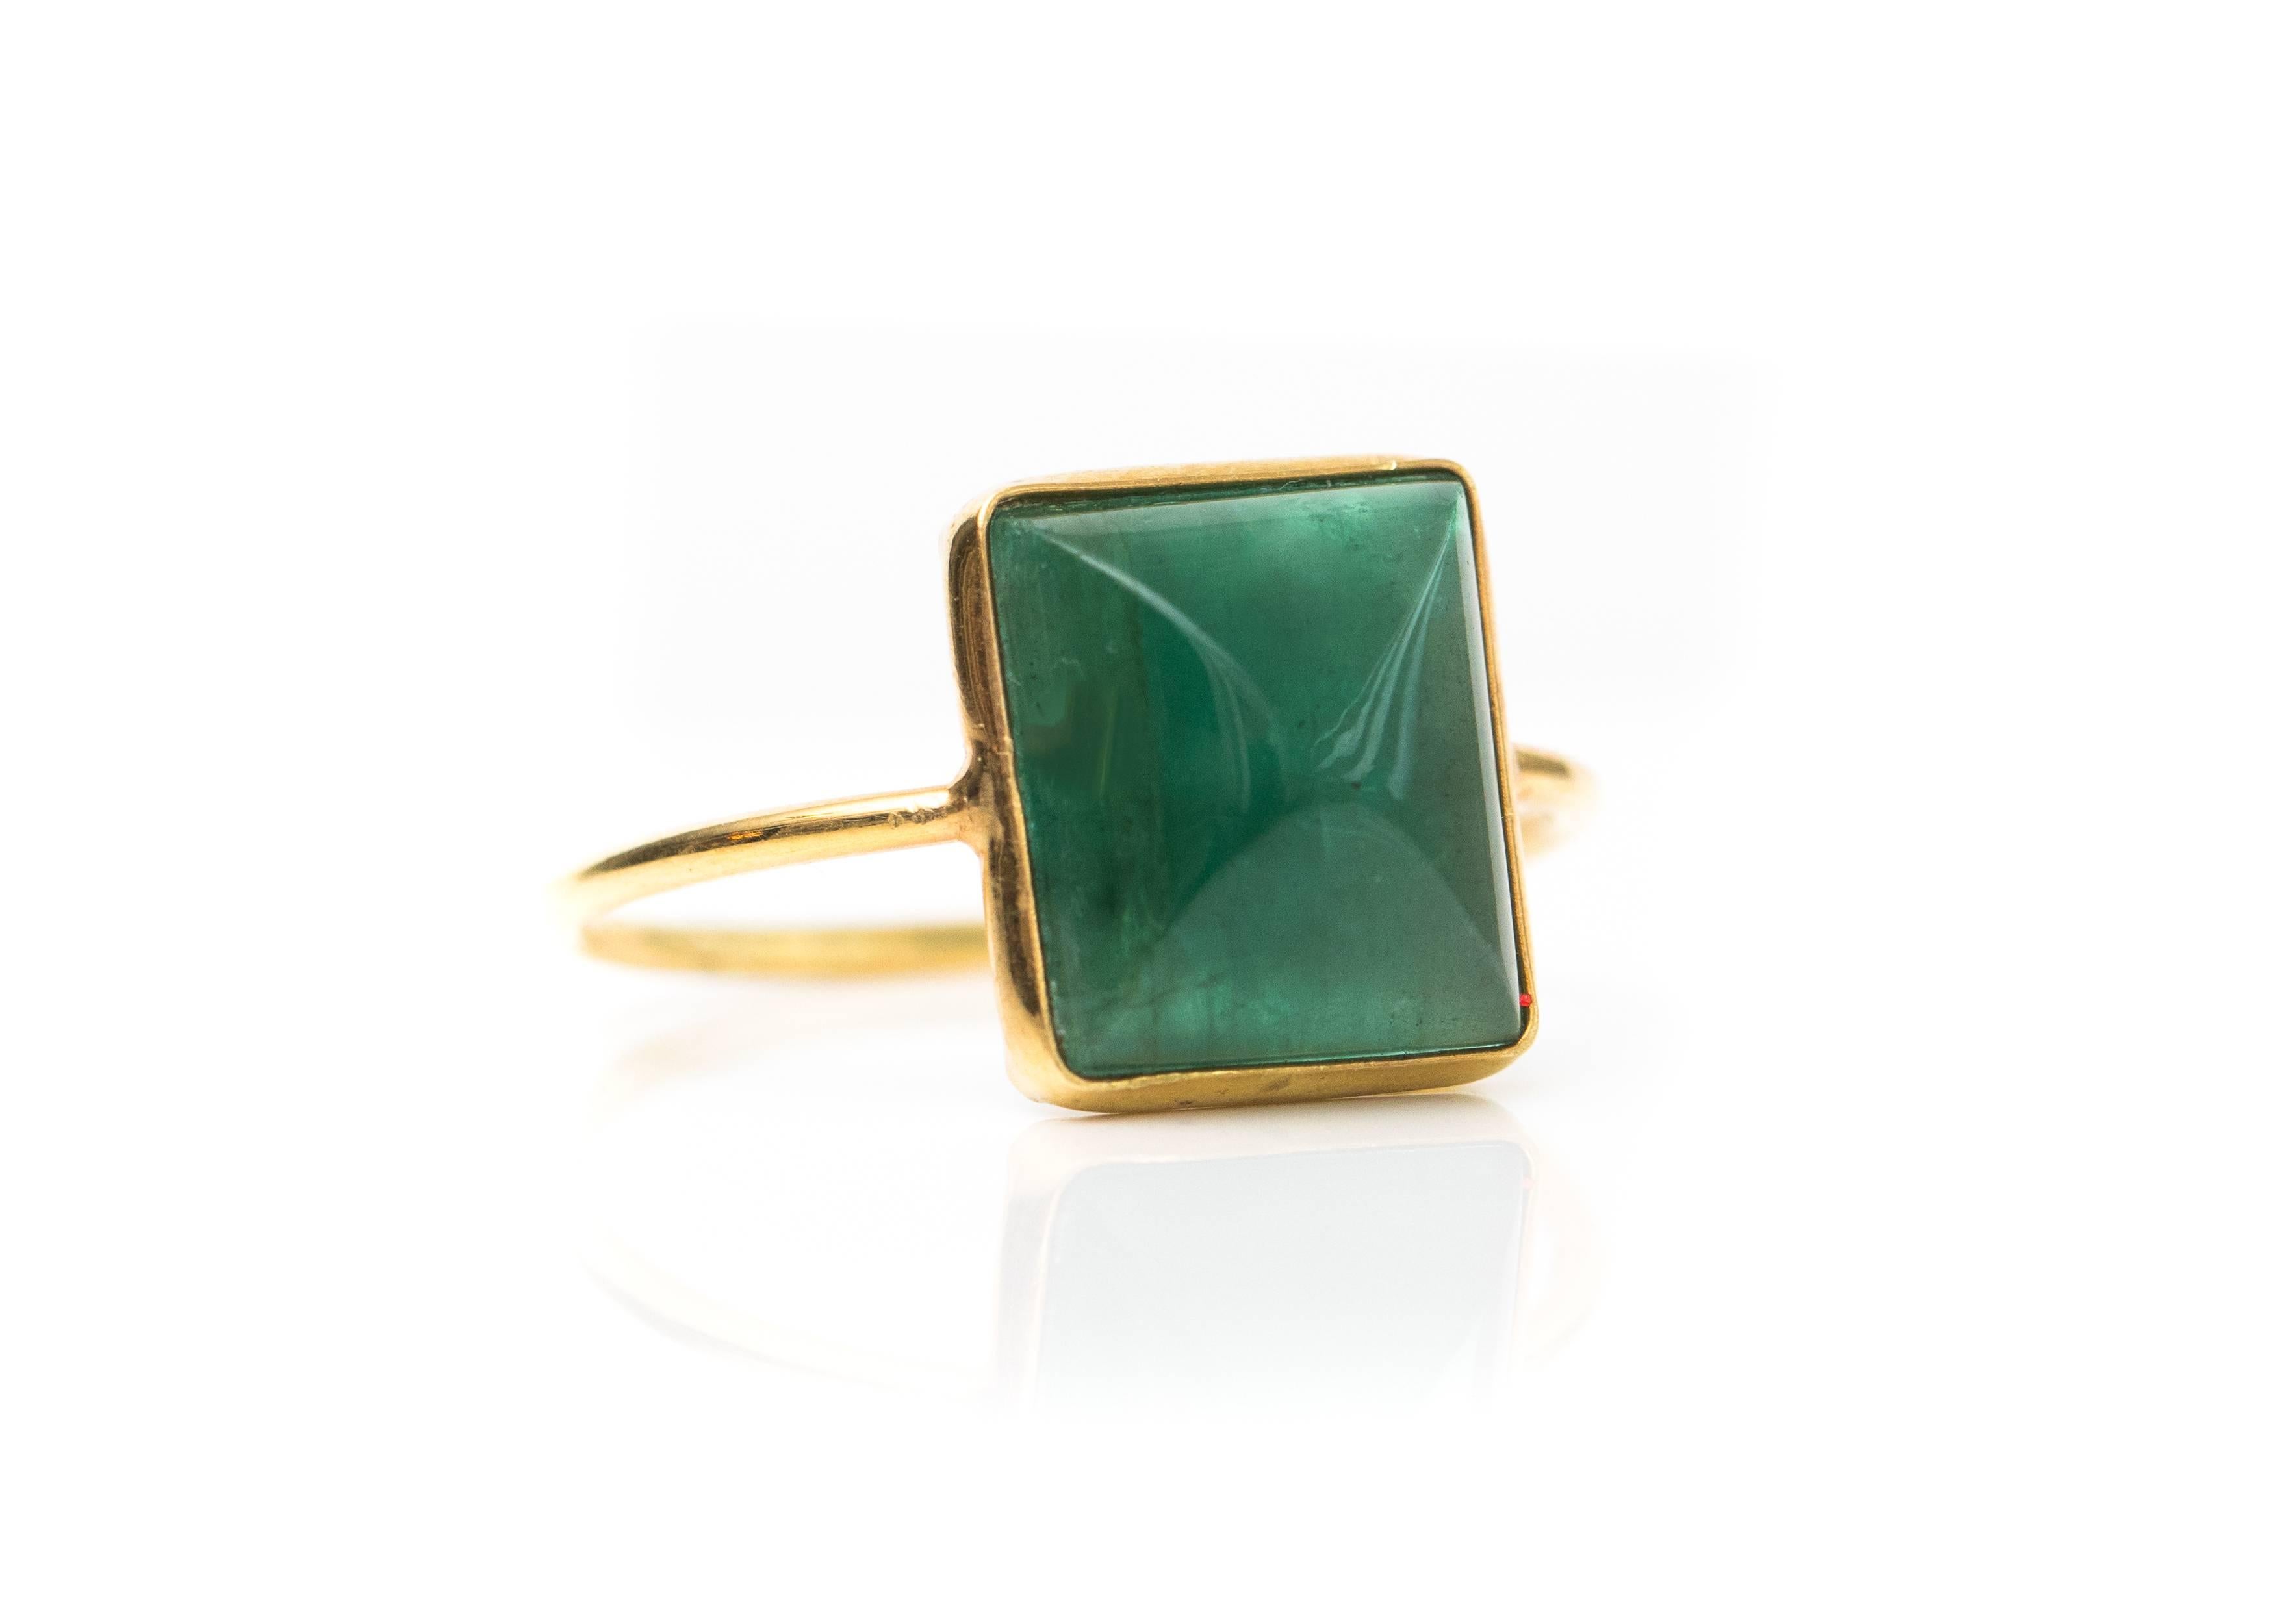 3.5 carat Emerald and 18 Karat Yellow Gold Ring

Features a 3.5 carat deep forest green South American Emerald center stone and 18 Karat Yellow Gold. The stunning rectangular Emerald cabochon center stone is bezel set in a north-south direction.